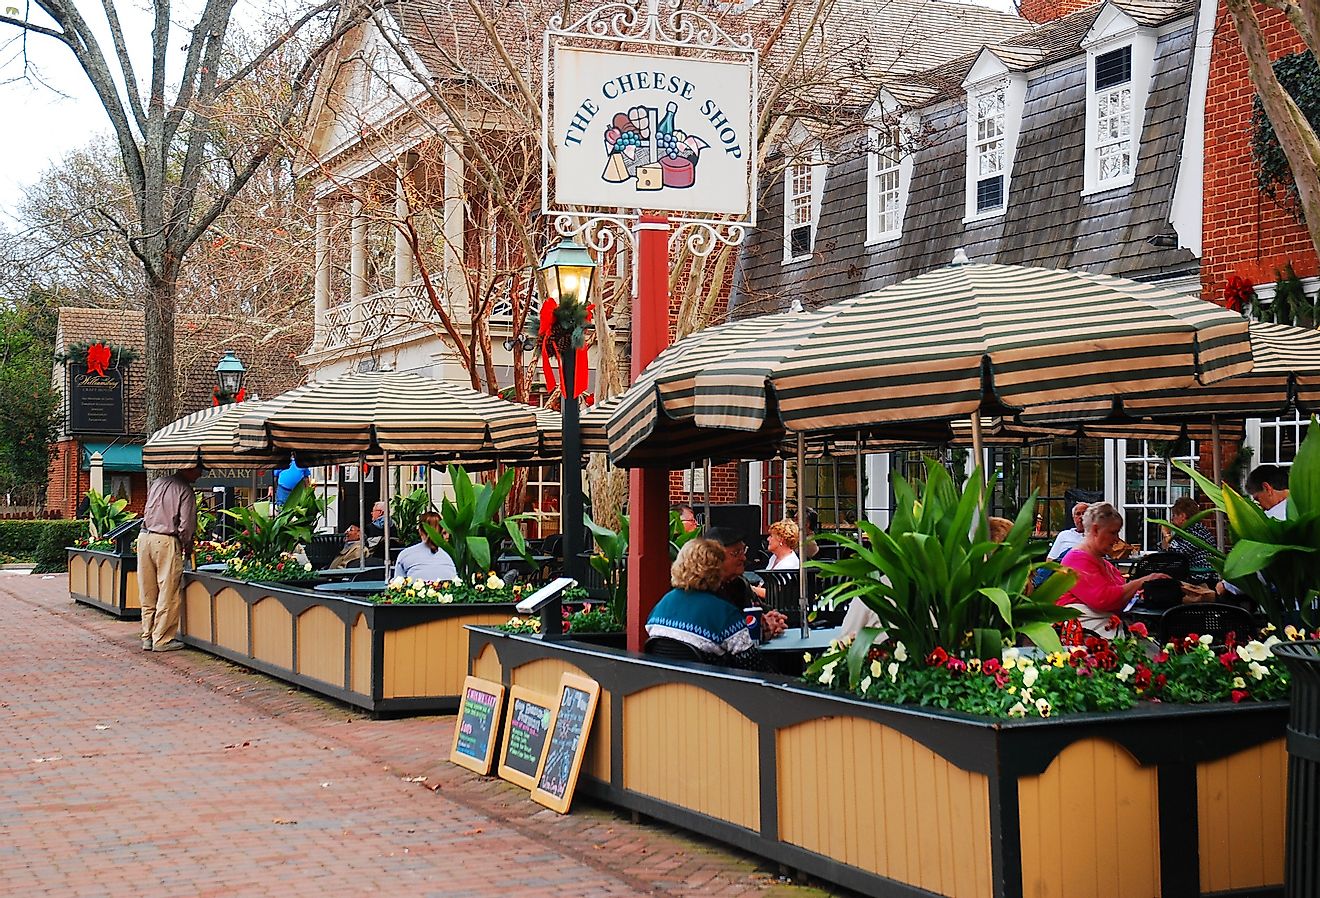 Folks enjoy an alfresco meal in Merchants Square, a retail and dining area near Colonial Williamsburg, Virginia. Image credit James Kirkikis via Shutterstock